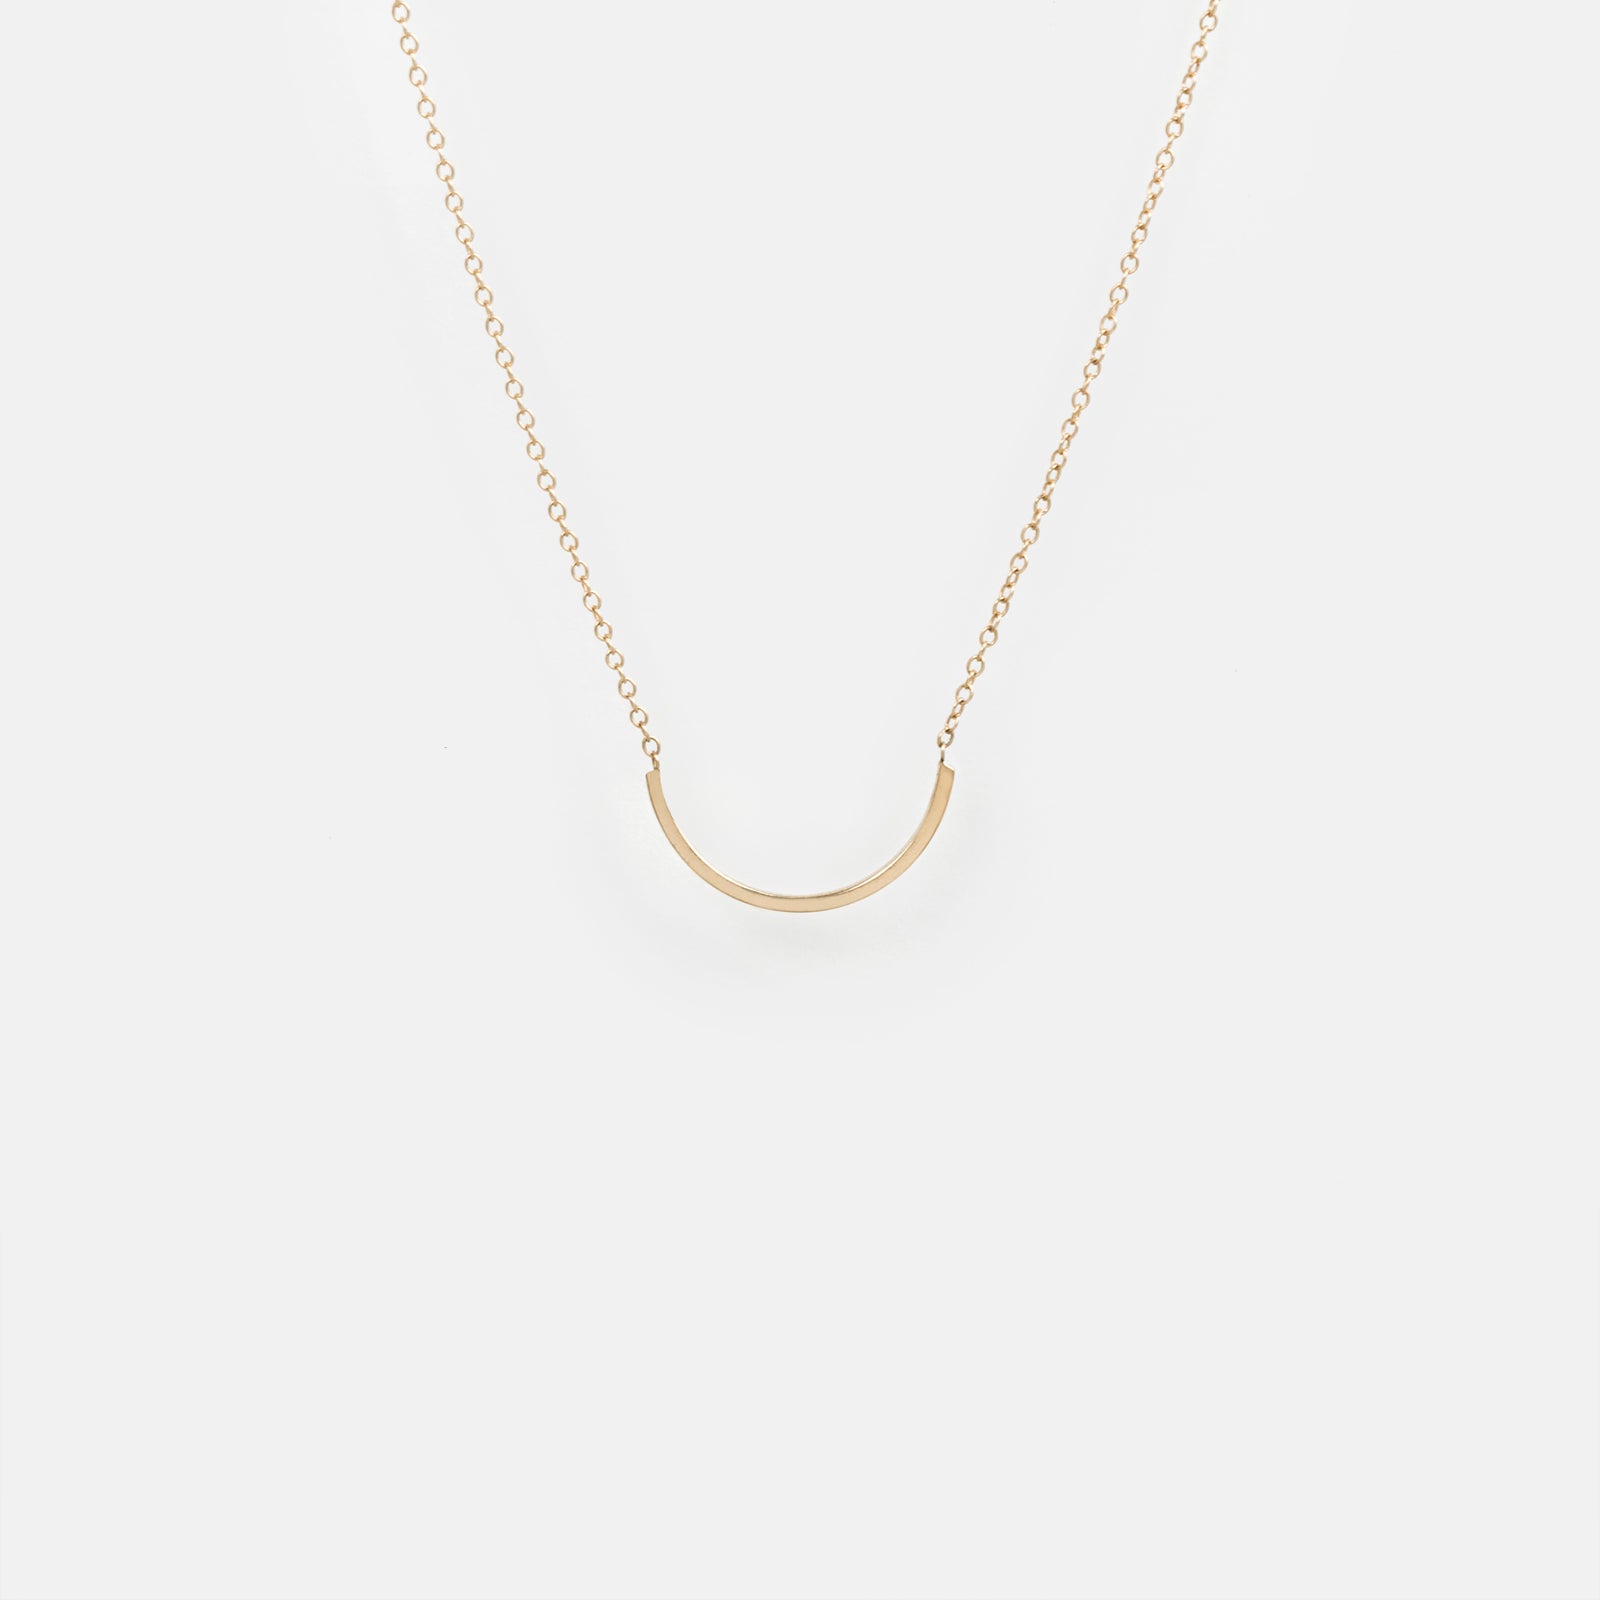 Uva Plain Necklace in 14k Gold By SHW Fine Jewelry NYC